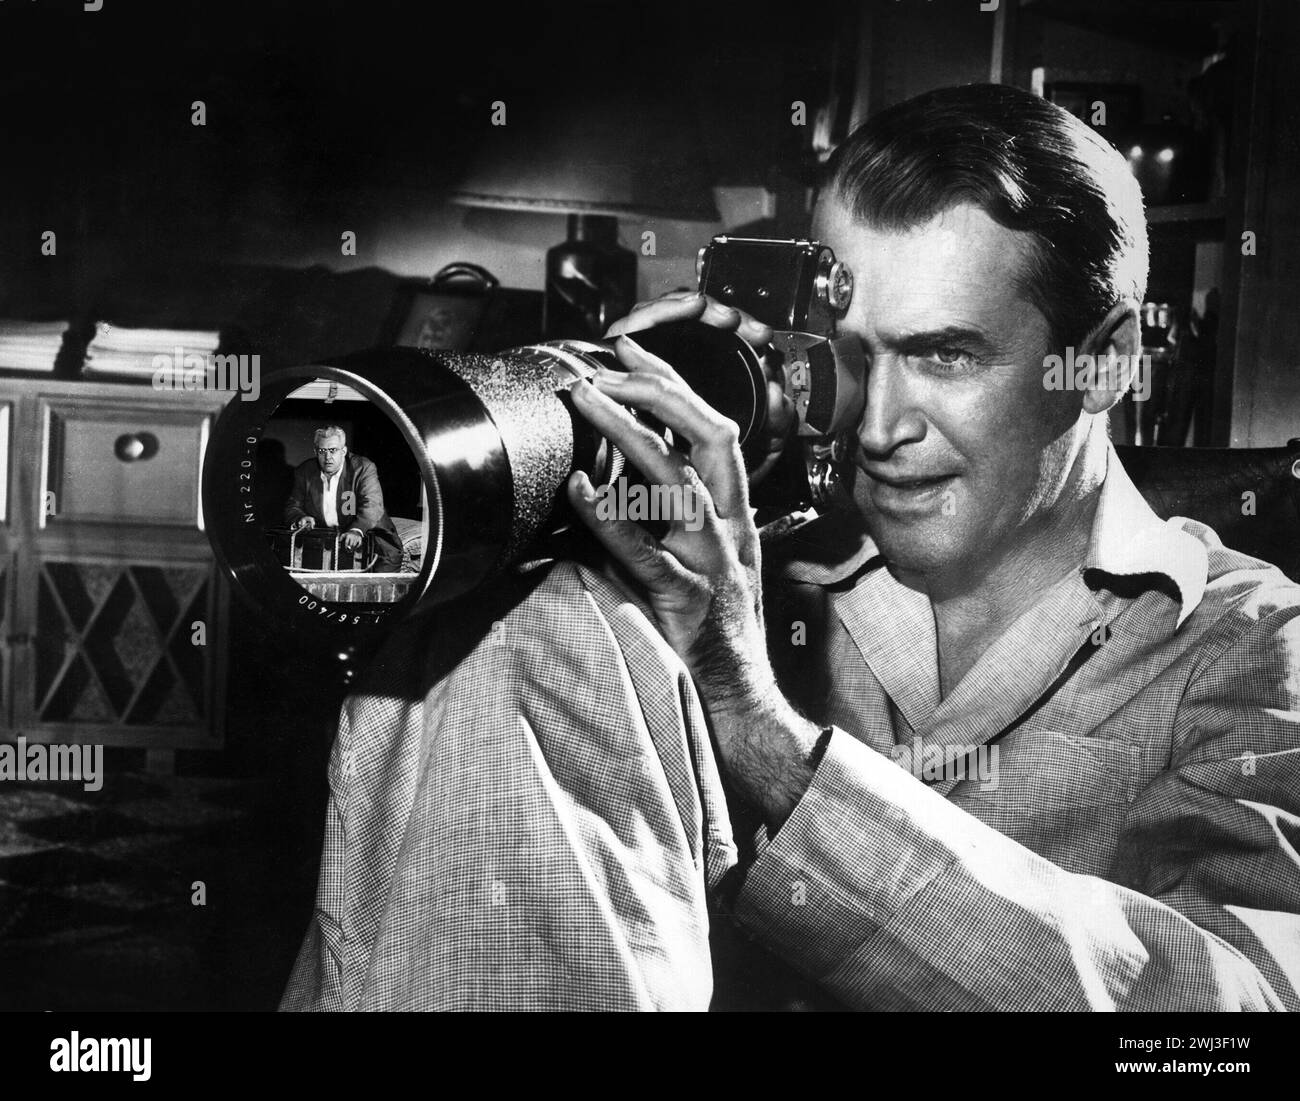 James Stewart with a camera - Publicity Photo for the Alfred Hitchcock directed film Rear Window, 1954. Stock Photo